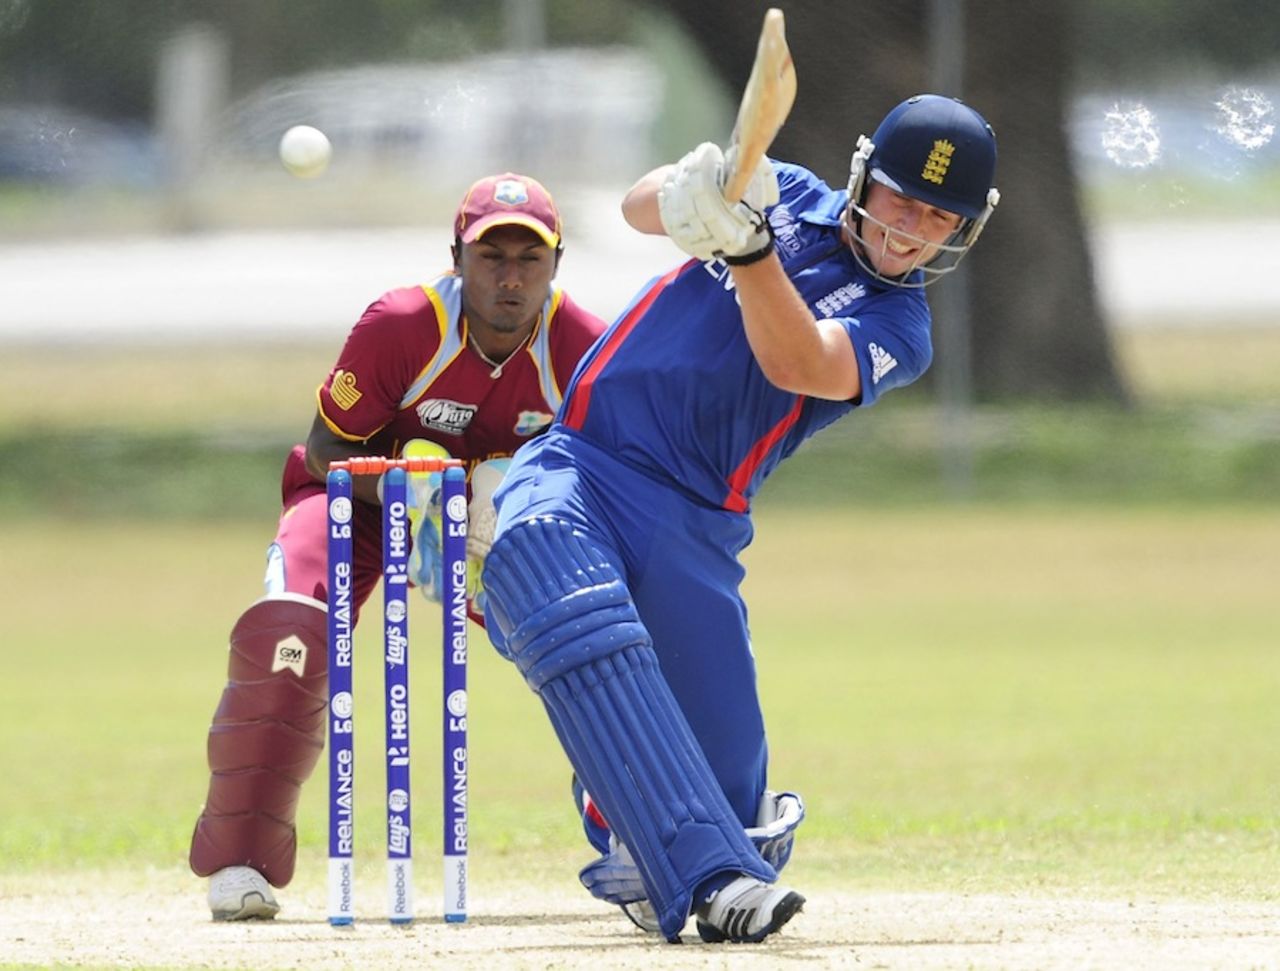 Sam Wood slogs towards mid-wicket, England v West Indies, ICC Under-19 World Cup, 5th place play-off, Townsville, August 24, 2012